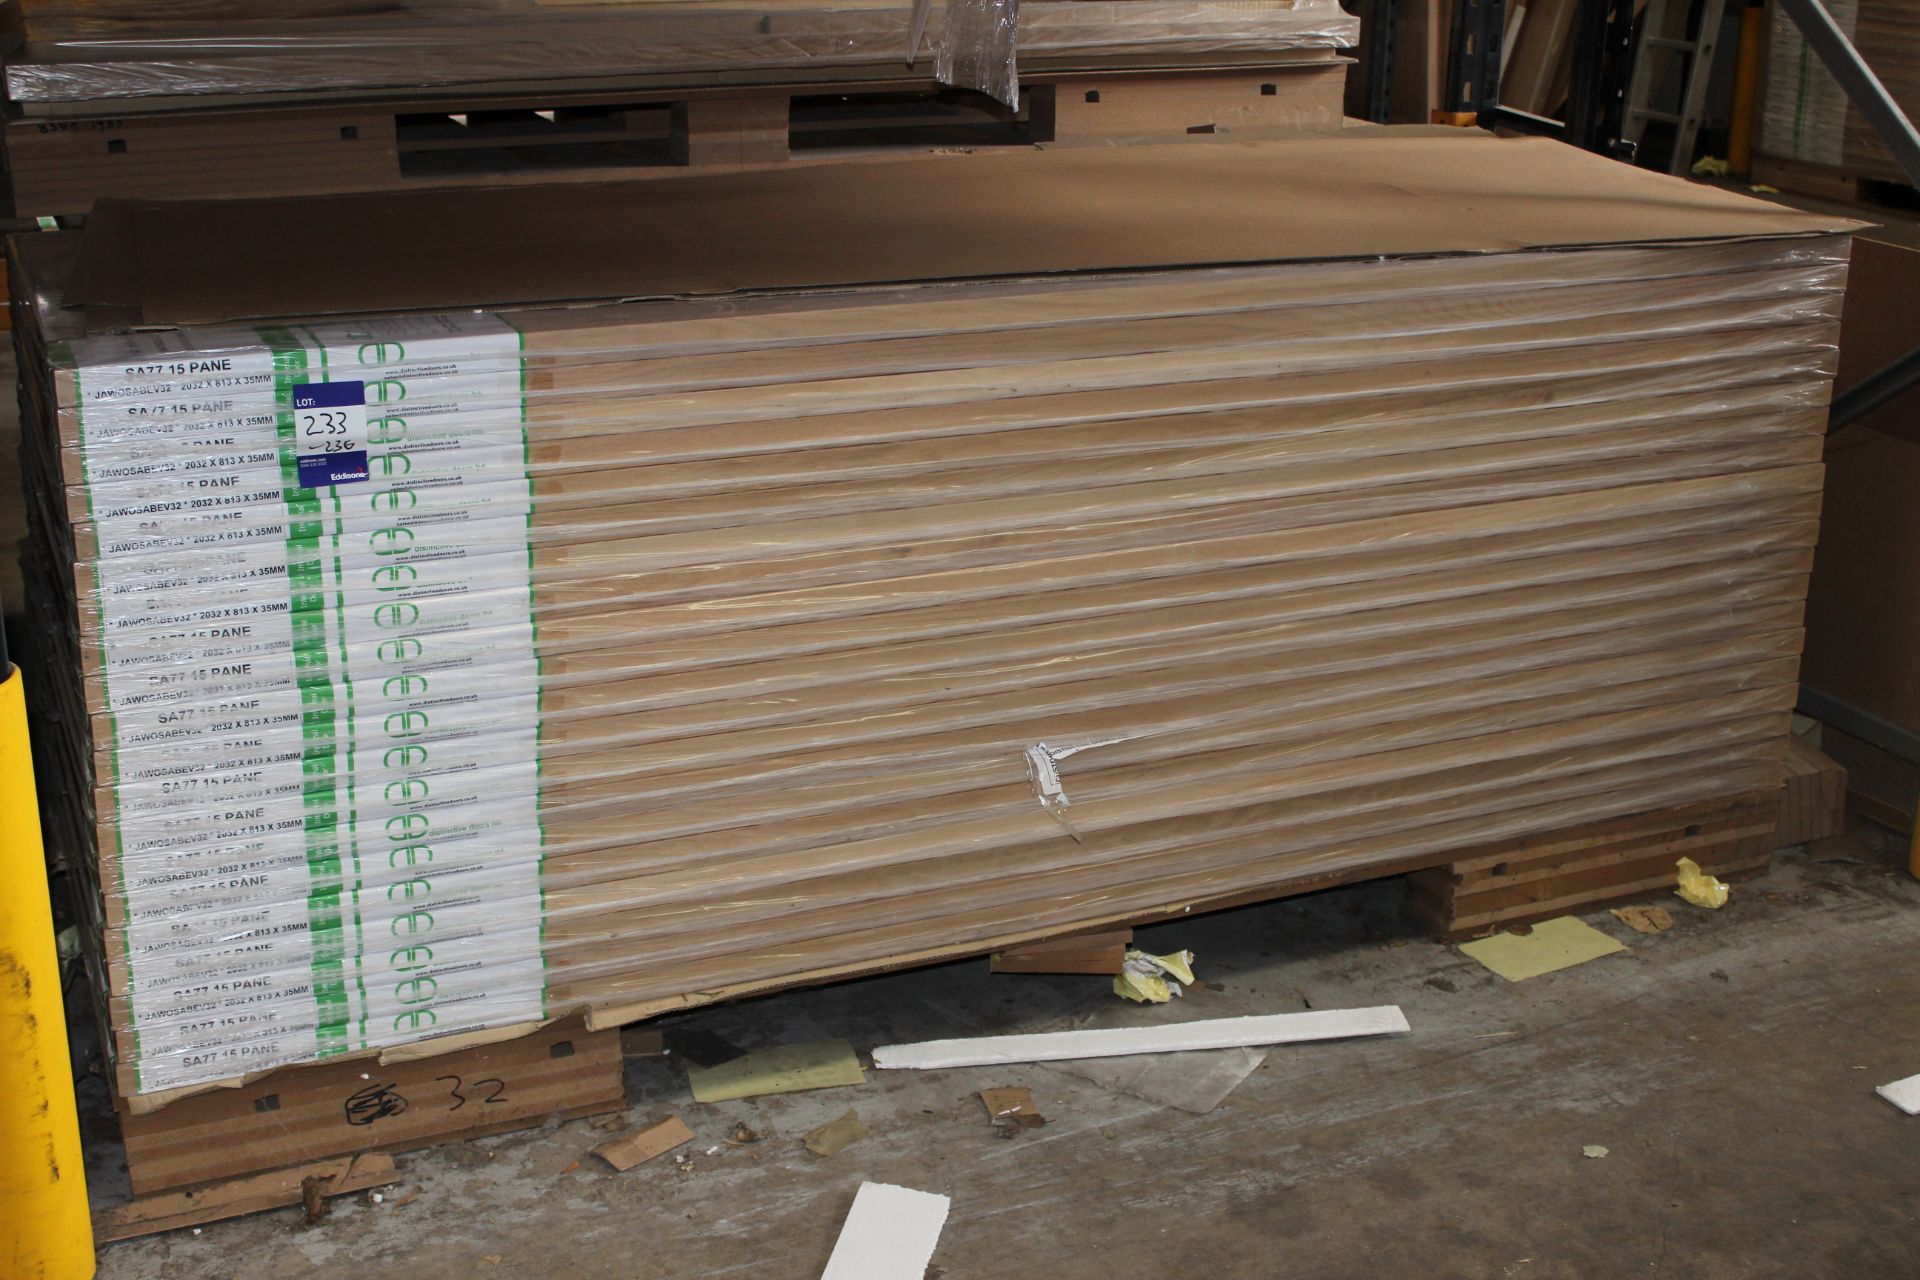 5 x SA77 15 Pane Internal, JAWOSABEB32, 2032mm x 813mm x 35mm- Lots to be handed out in order they - Image 2 of 3